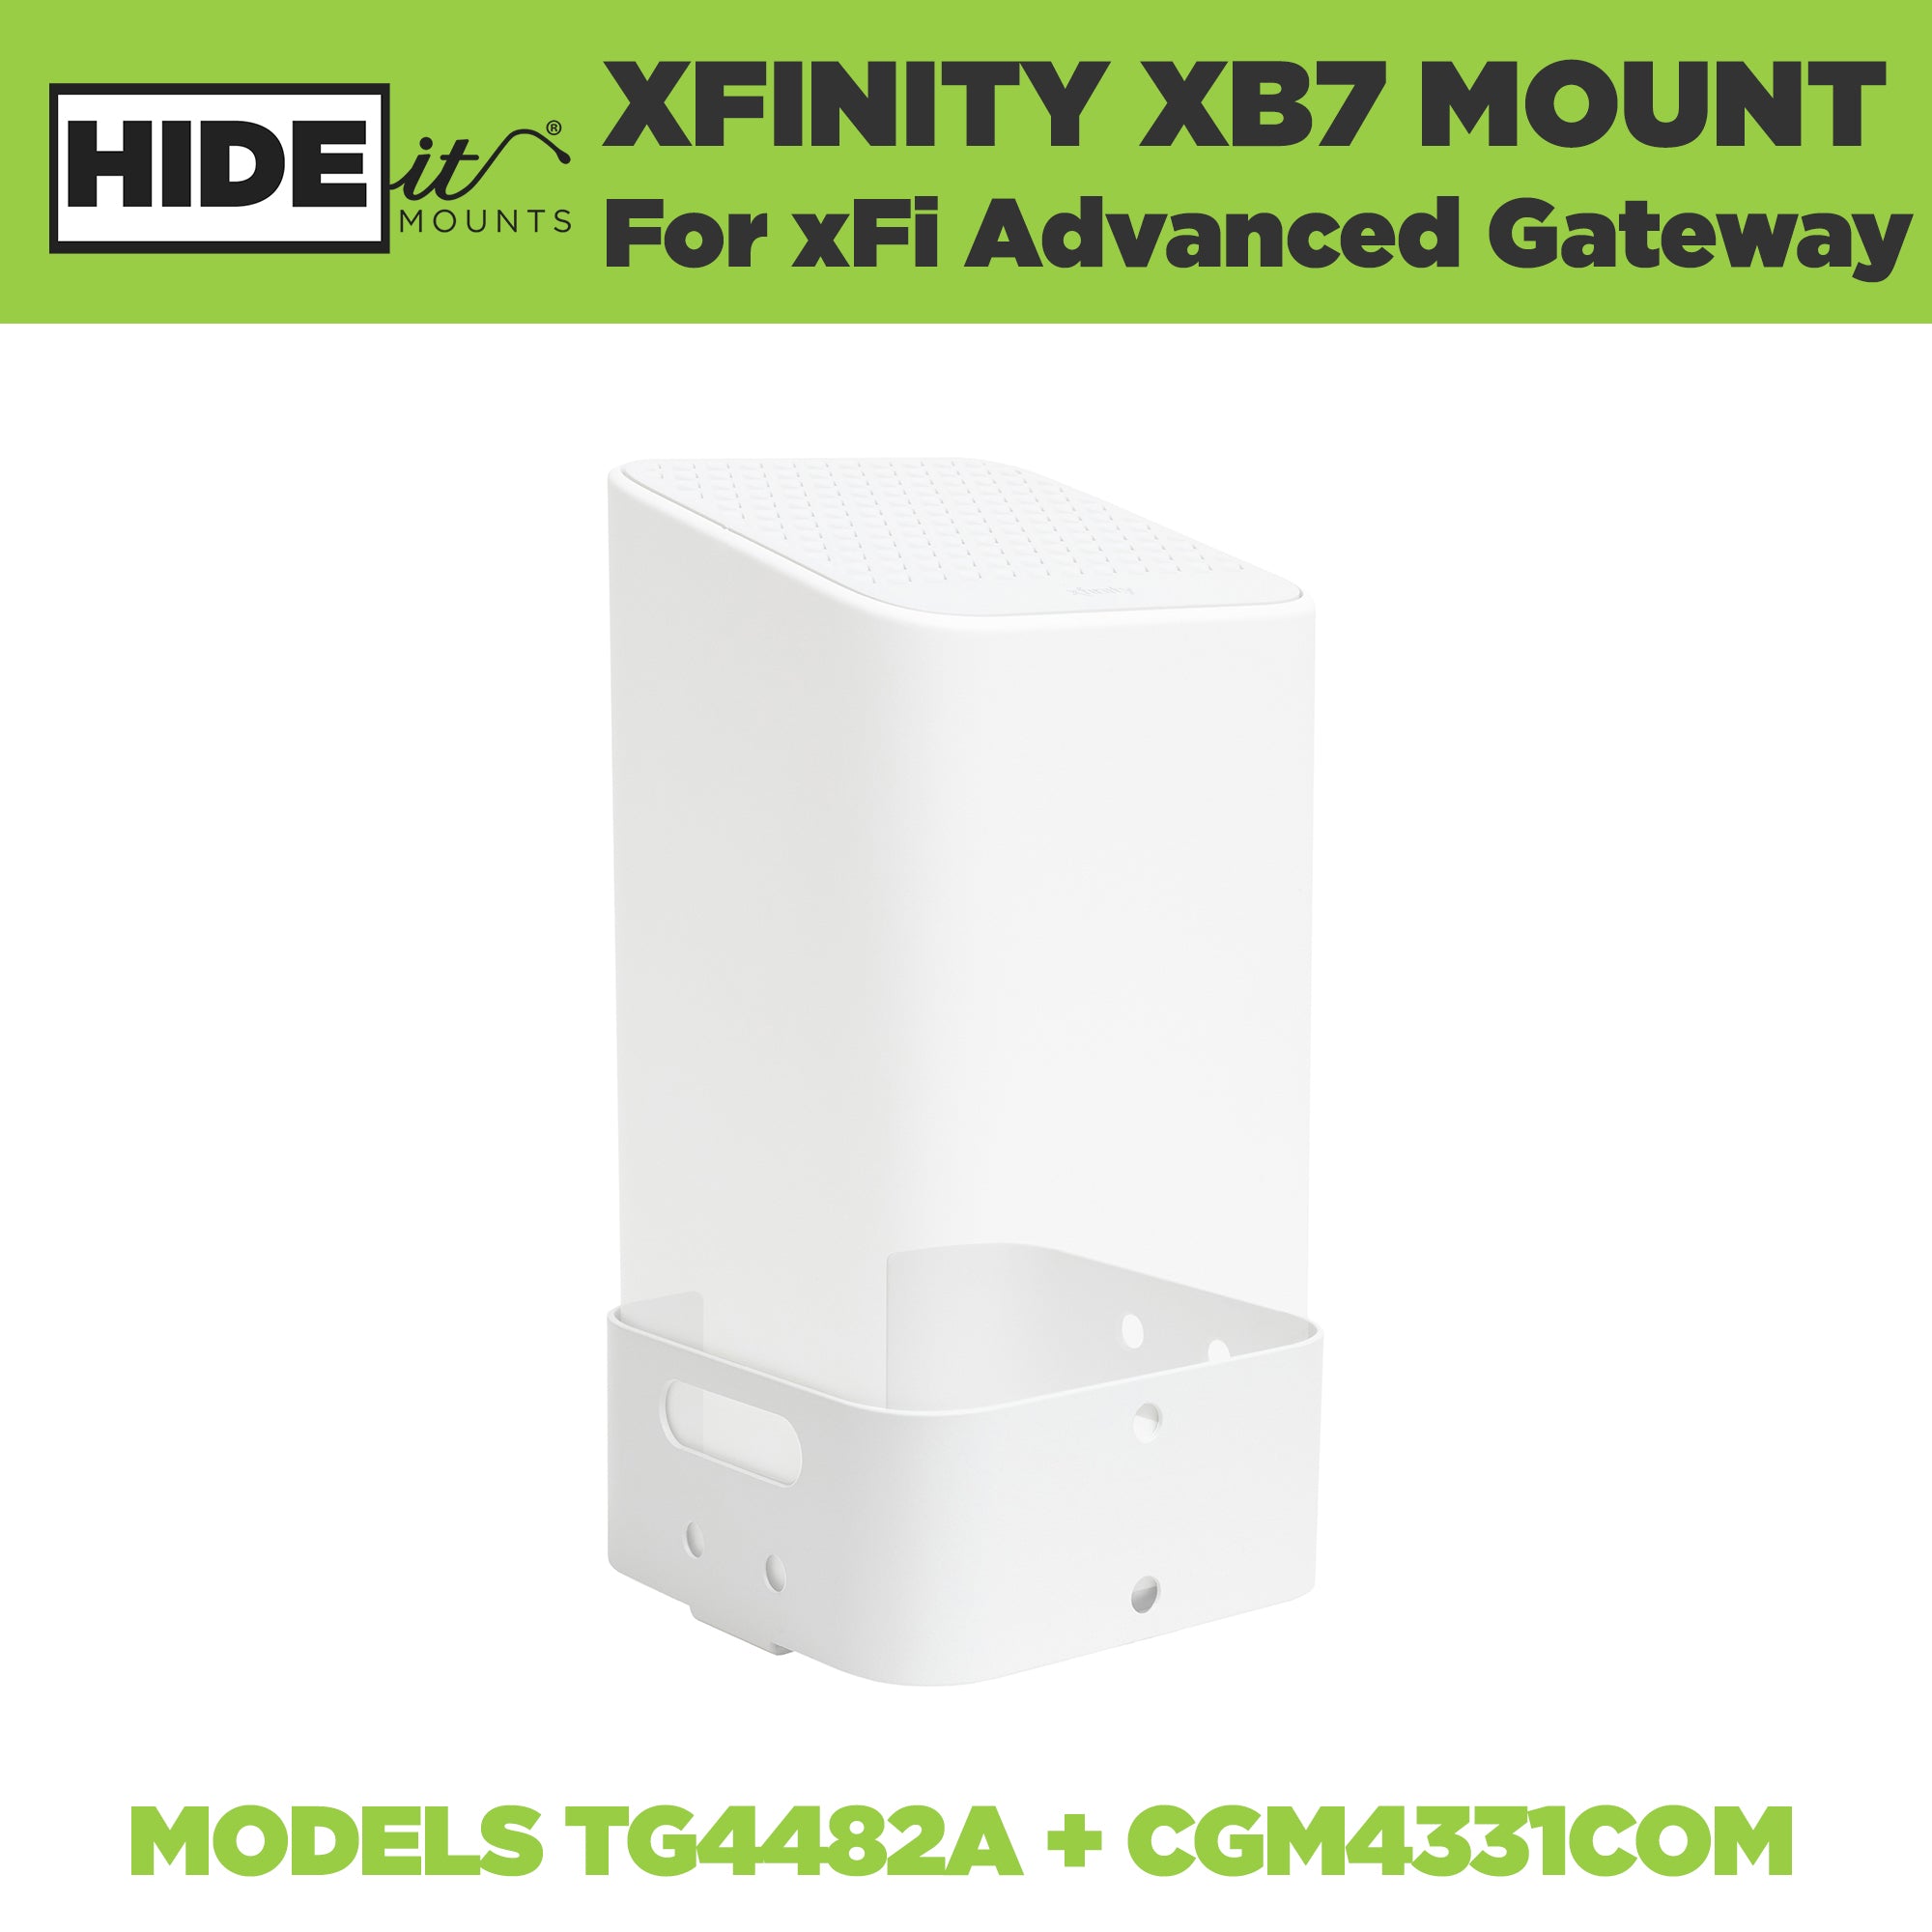 Xfinity WiFi Router Mount designed by HIDEit Mounts for the Xfinity XFi Advanced Gateway Models TG4482A and CGM4331COM.